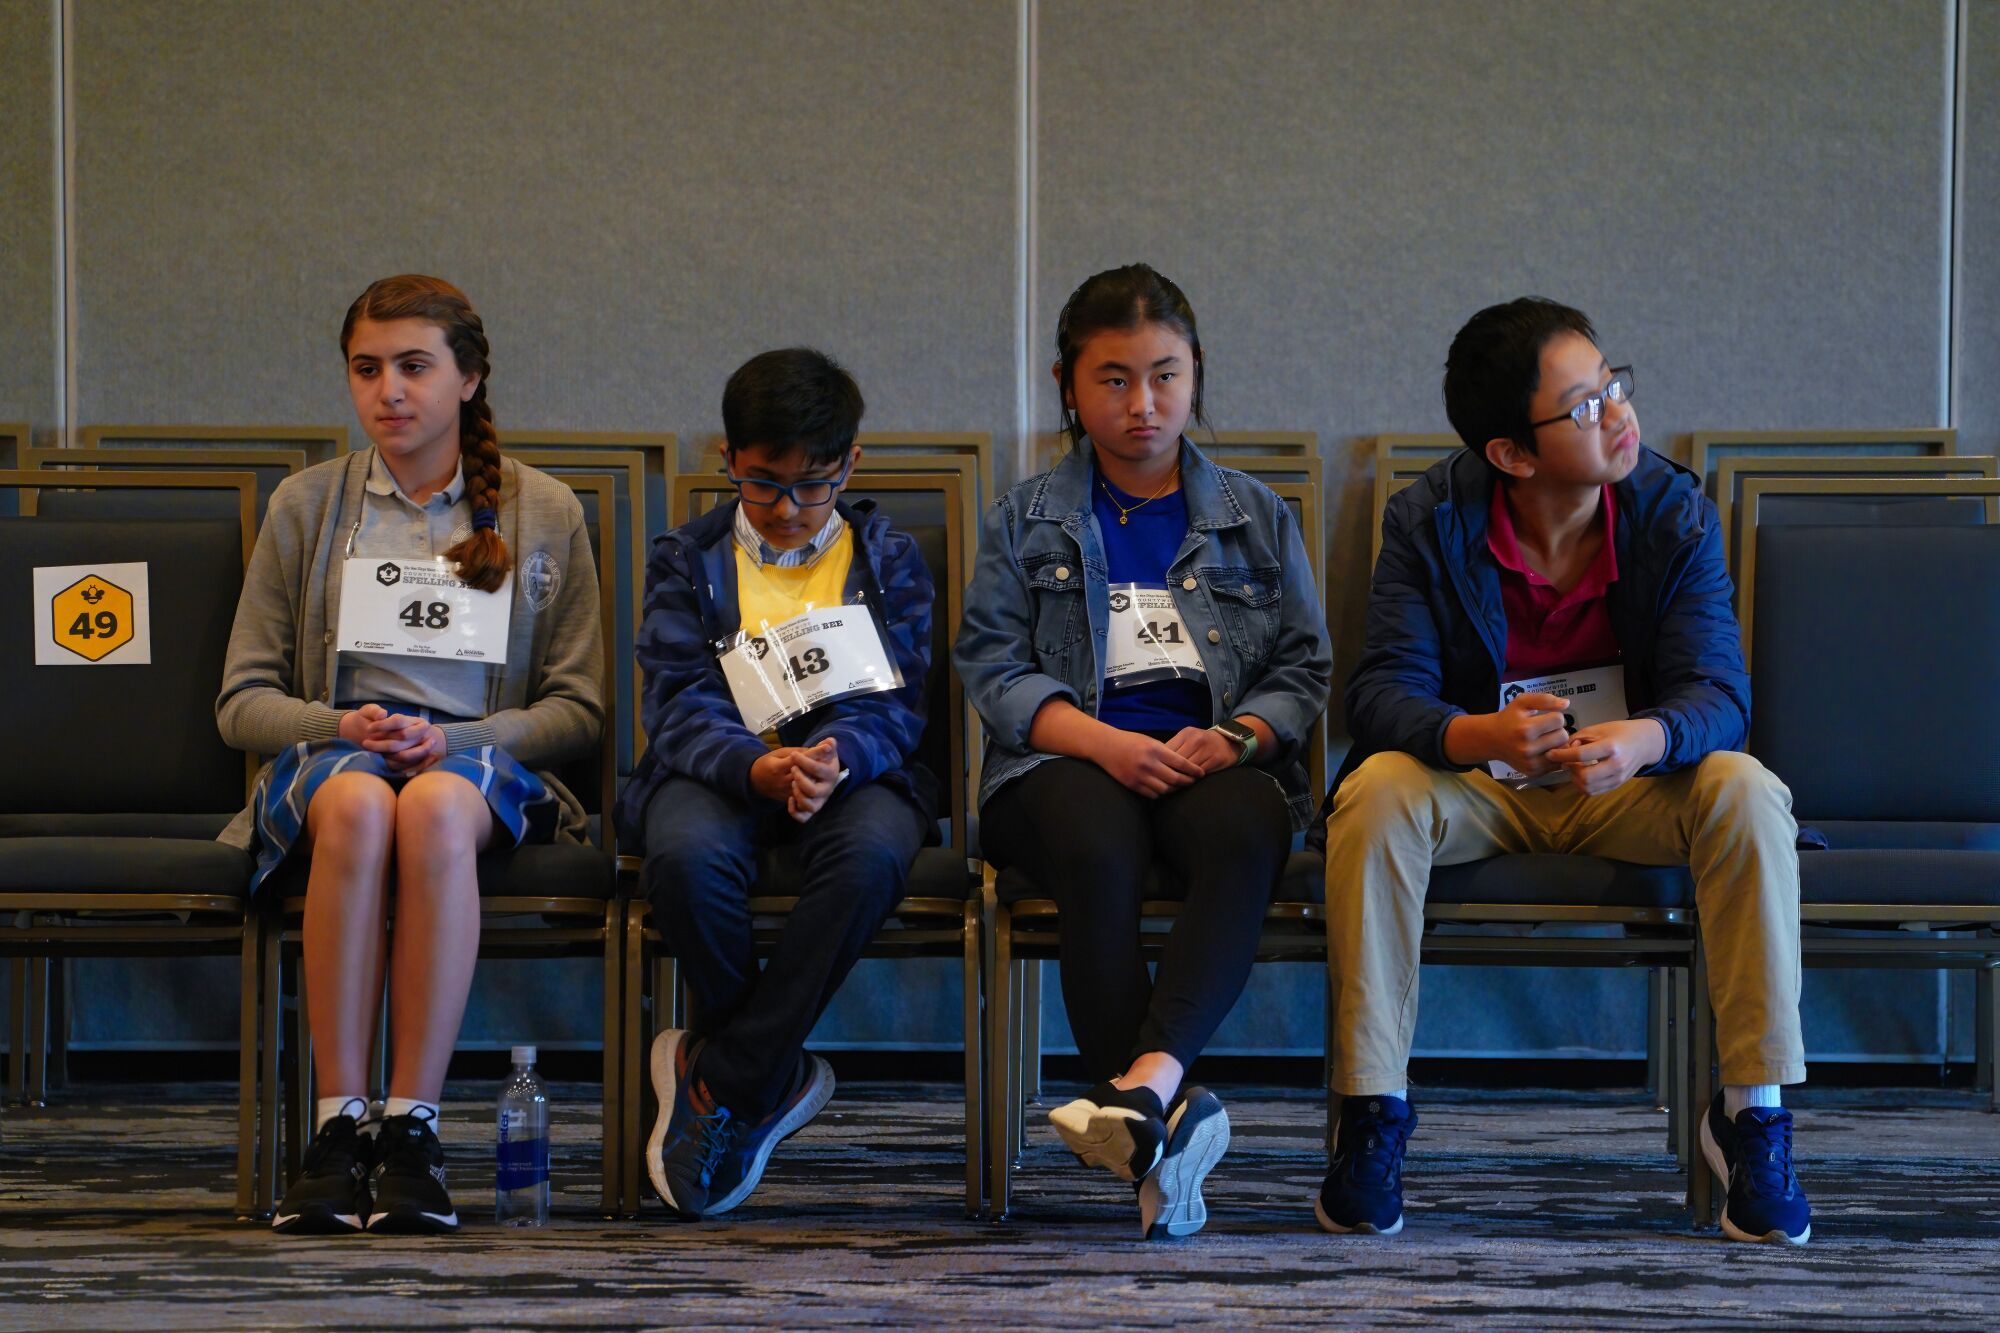 The Countywide Spelling Bee's final four sit before being called to the stage to compete.